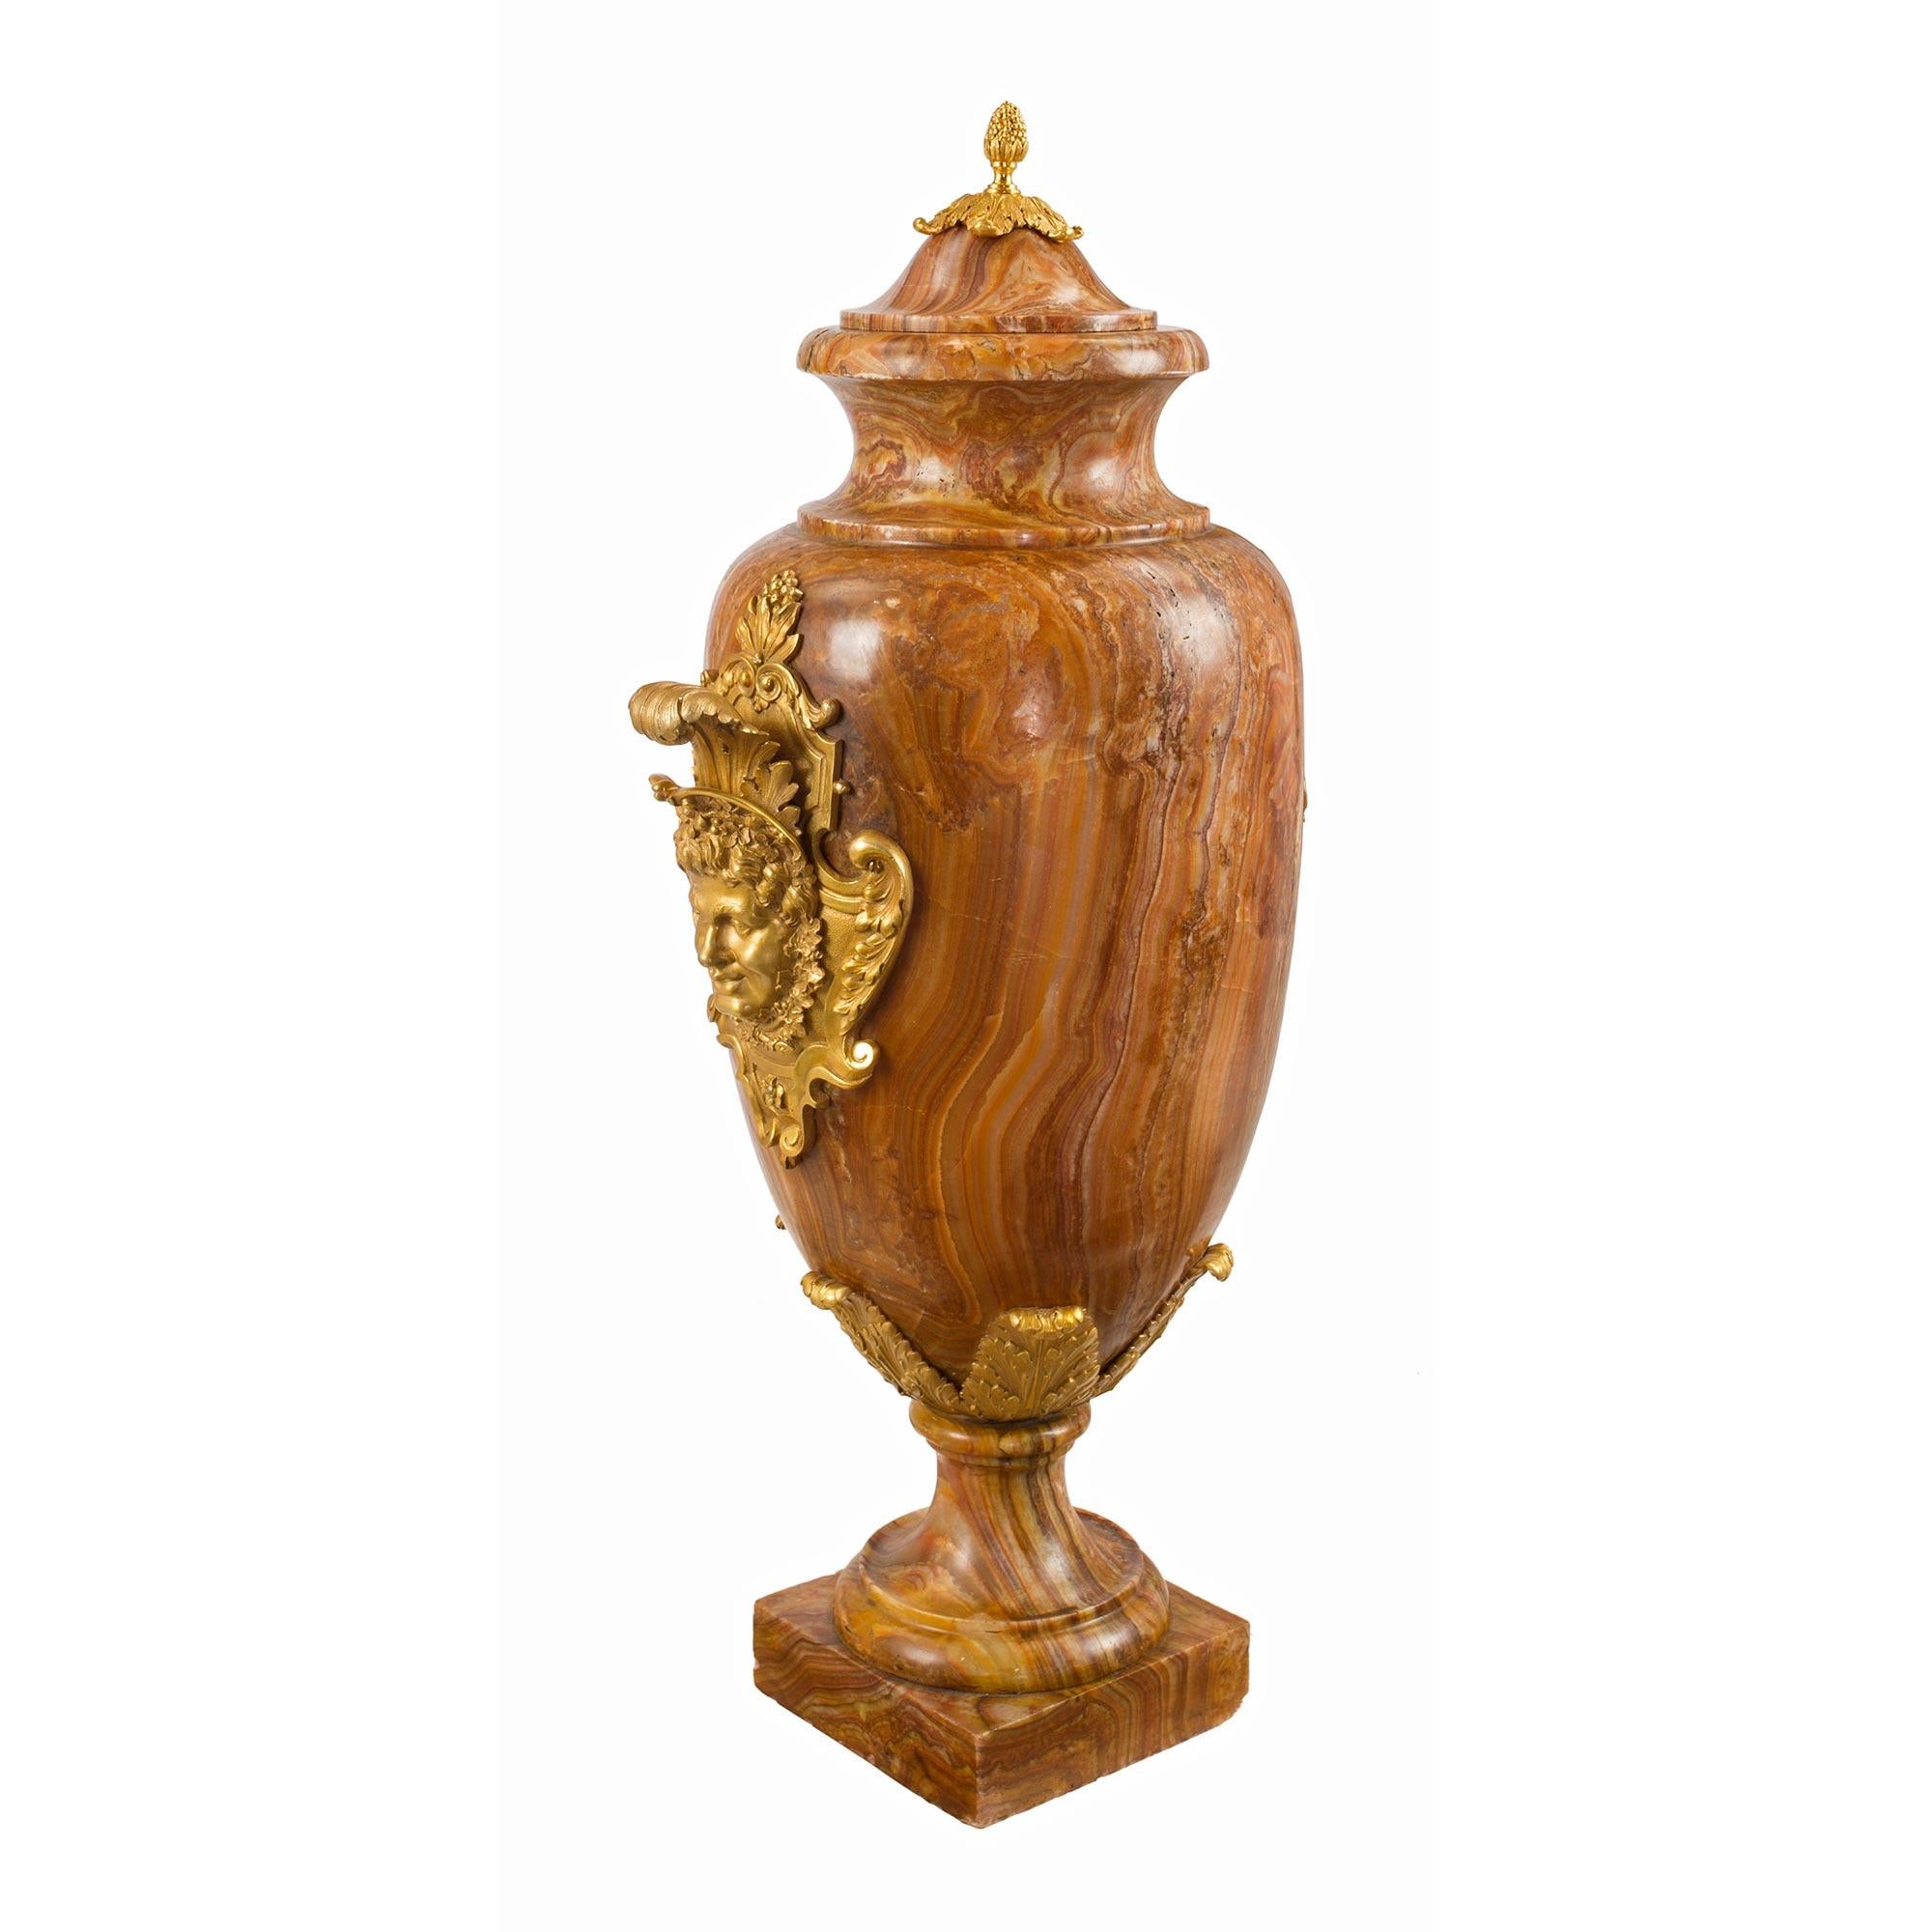 A striking and large scale pair of French 19th century Louis XVI st. Alabastro Fiorito and ormolu lidded urns. Each urn is raised by a square base below the circular mottled socle pedestal. The elegantly shaped body displays finely detailed ormolu